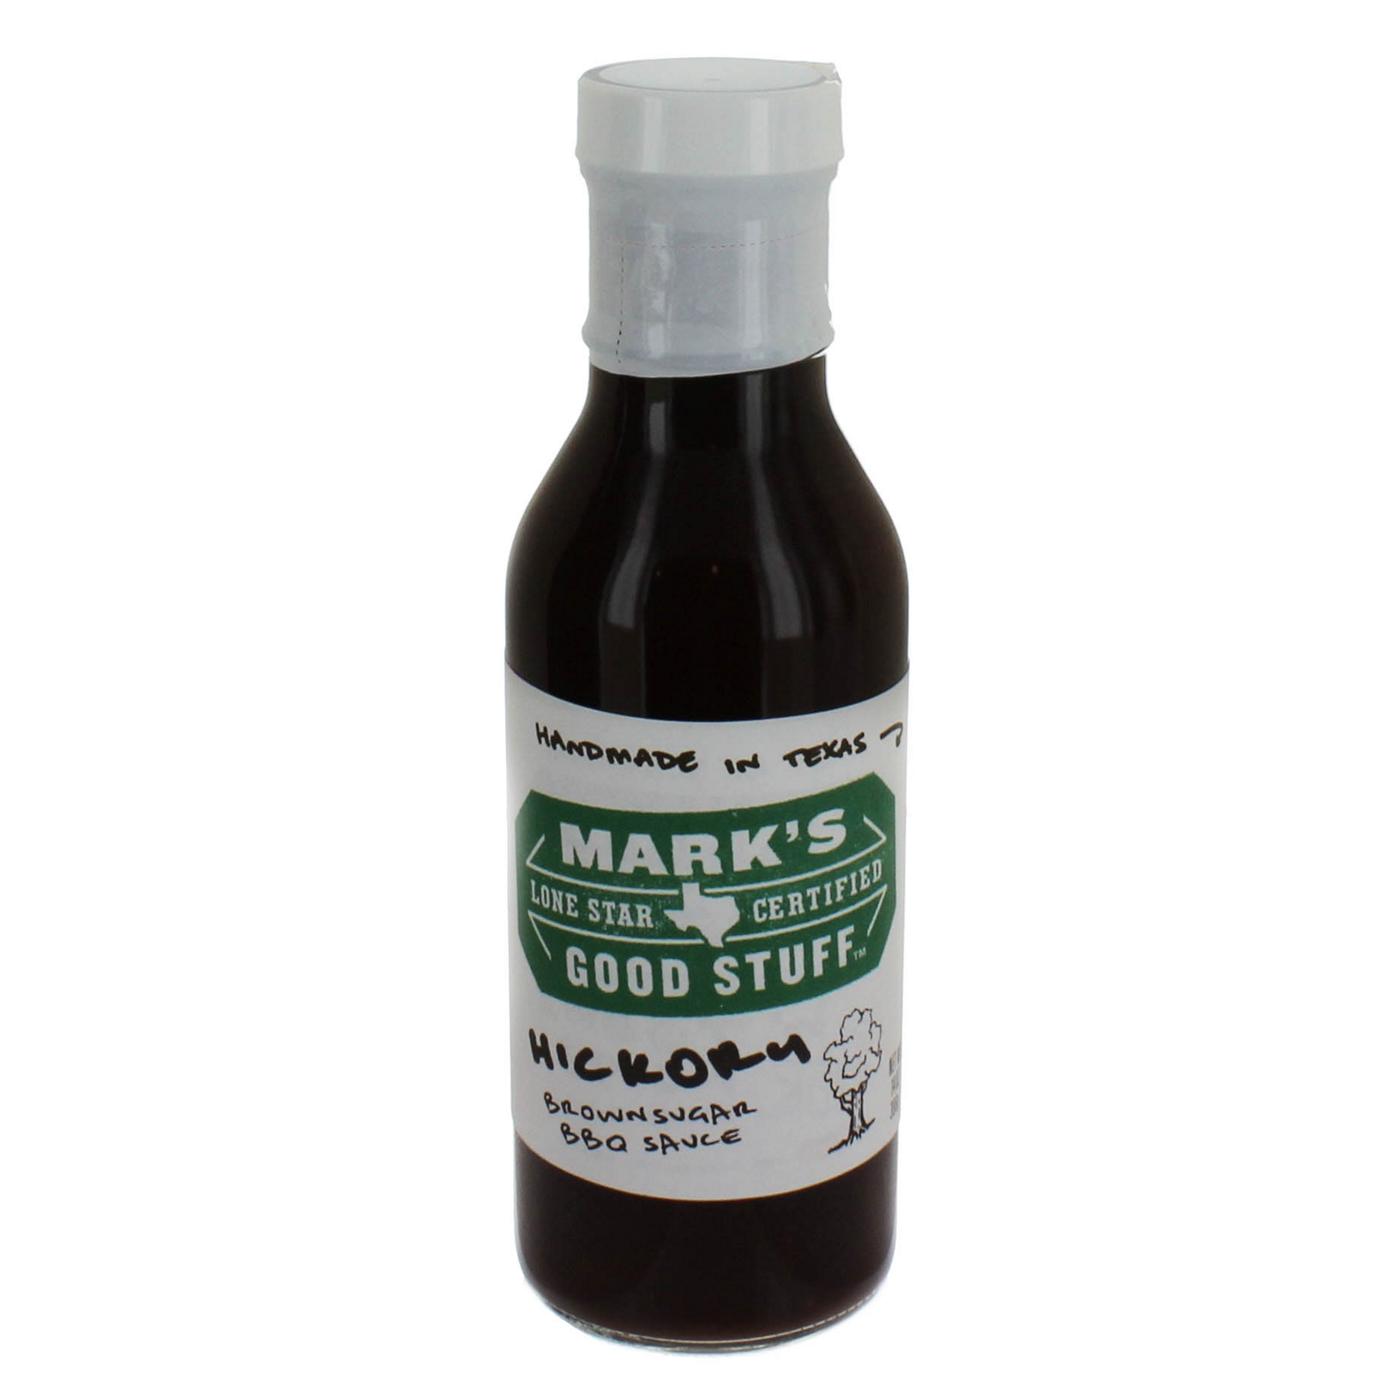 Mark's Good Stuff Lone Star Certified Hickory Brown Sugar BBQ Sauce; image 1 of 2